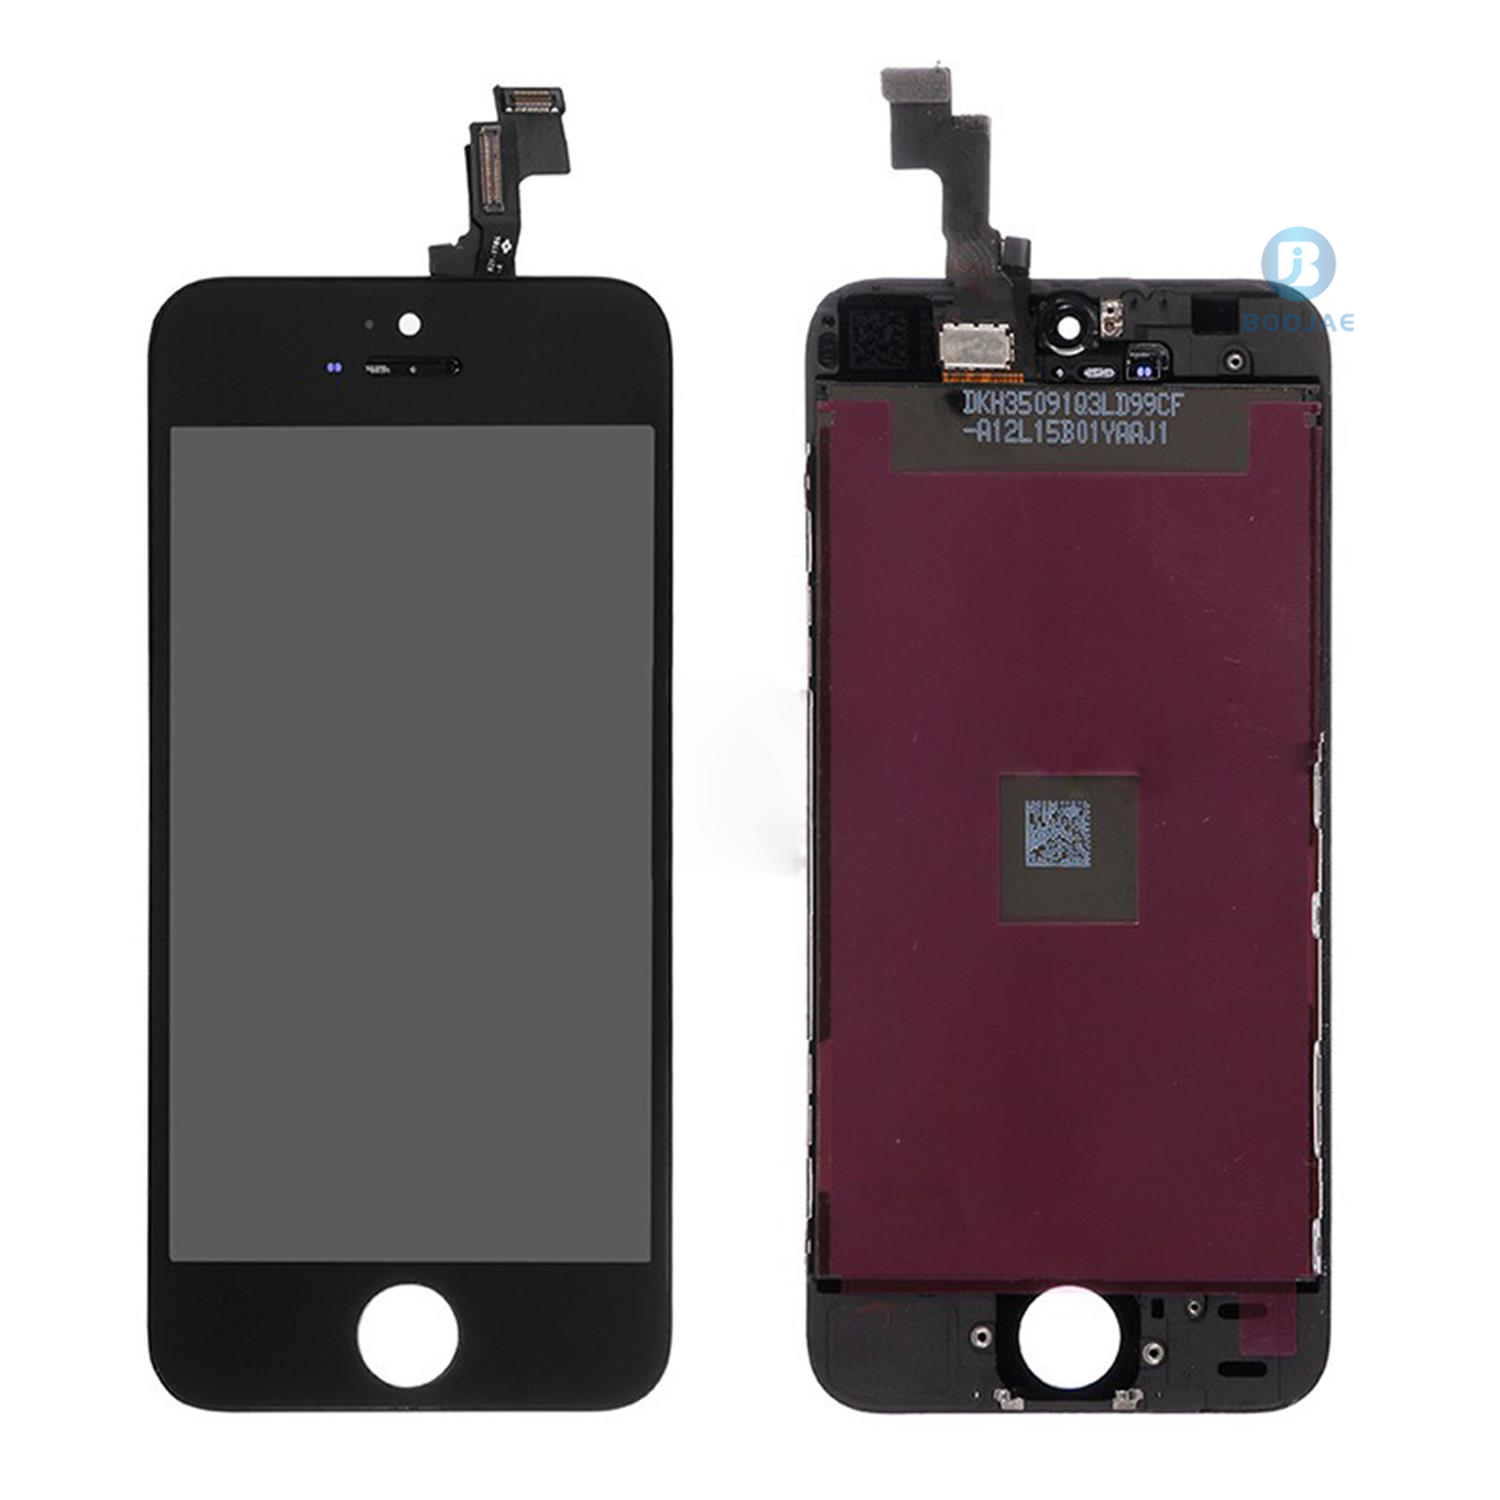 iPhone SE LCD Screen Display and Touch Panel Digitizer Assembly Replacement